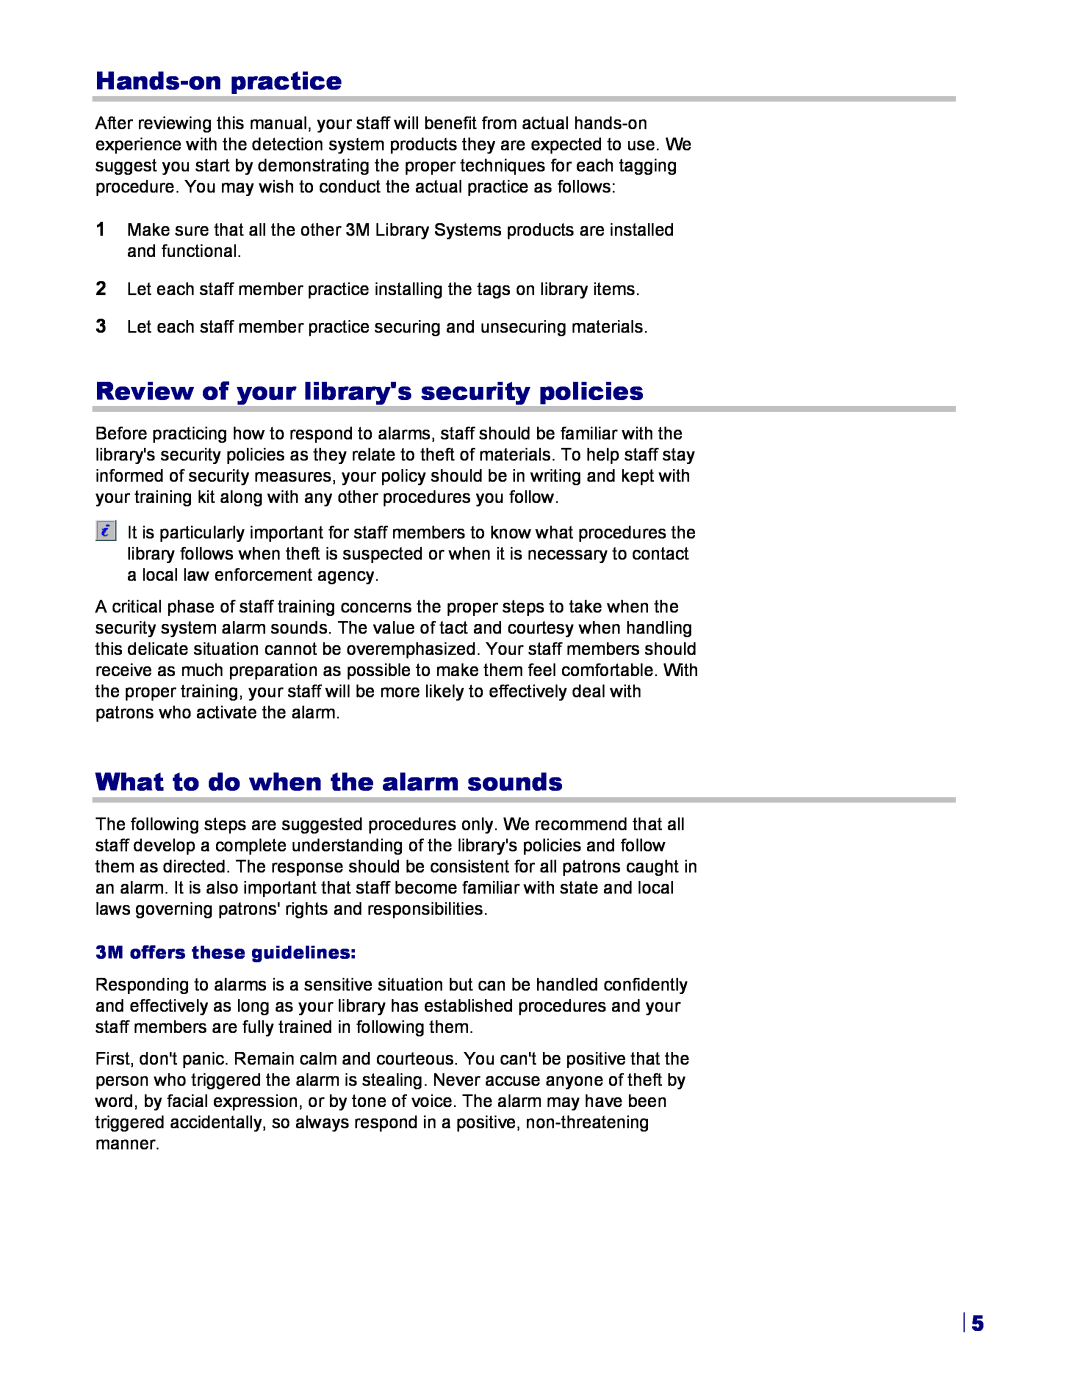 3M 8800 Series owner manual Hands-onpractice, Review of your librarys security policies, What to do when the alarm sounds 